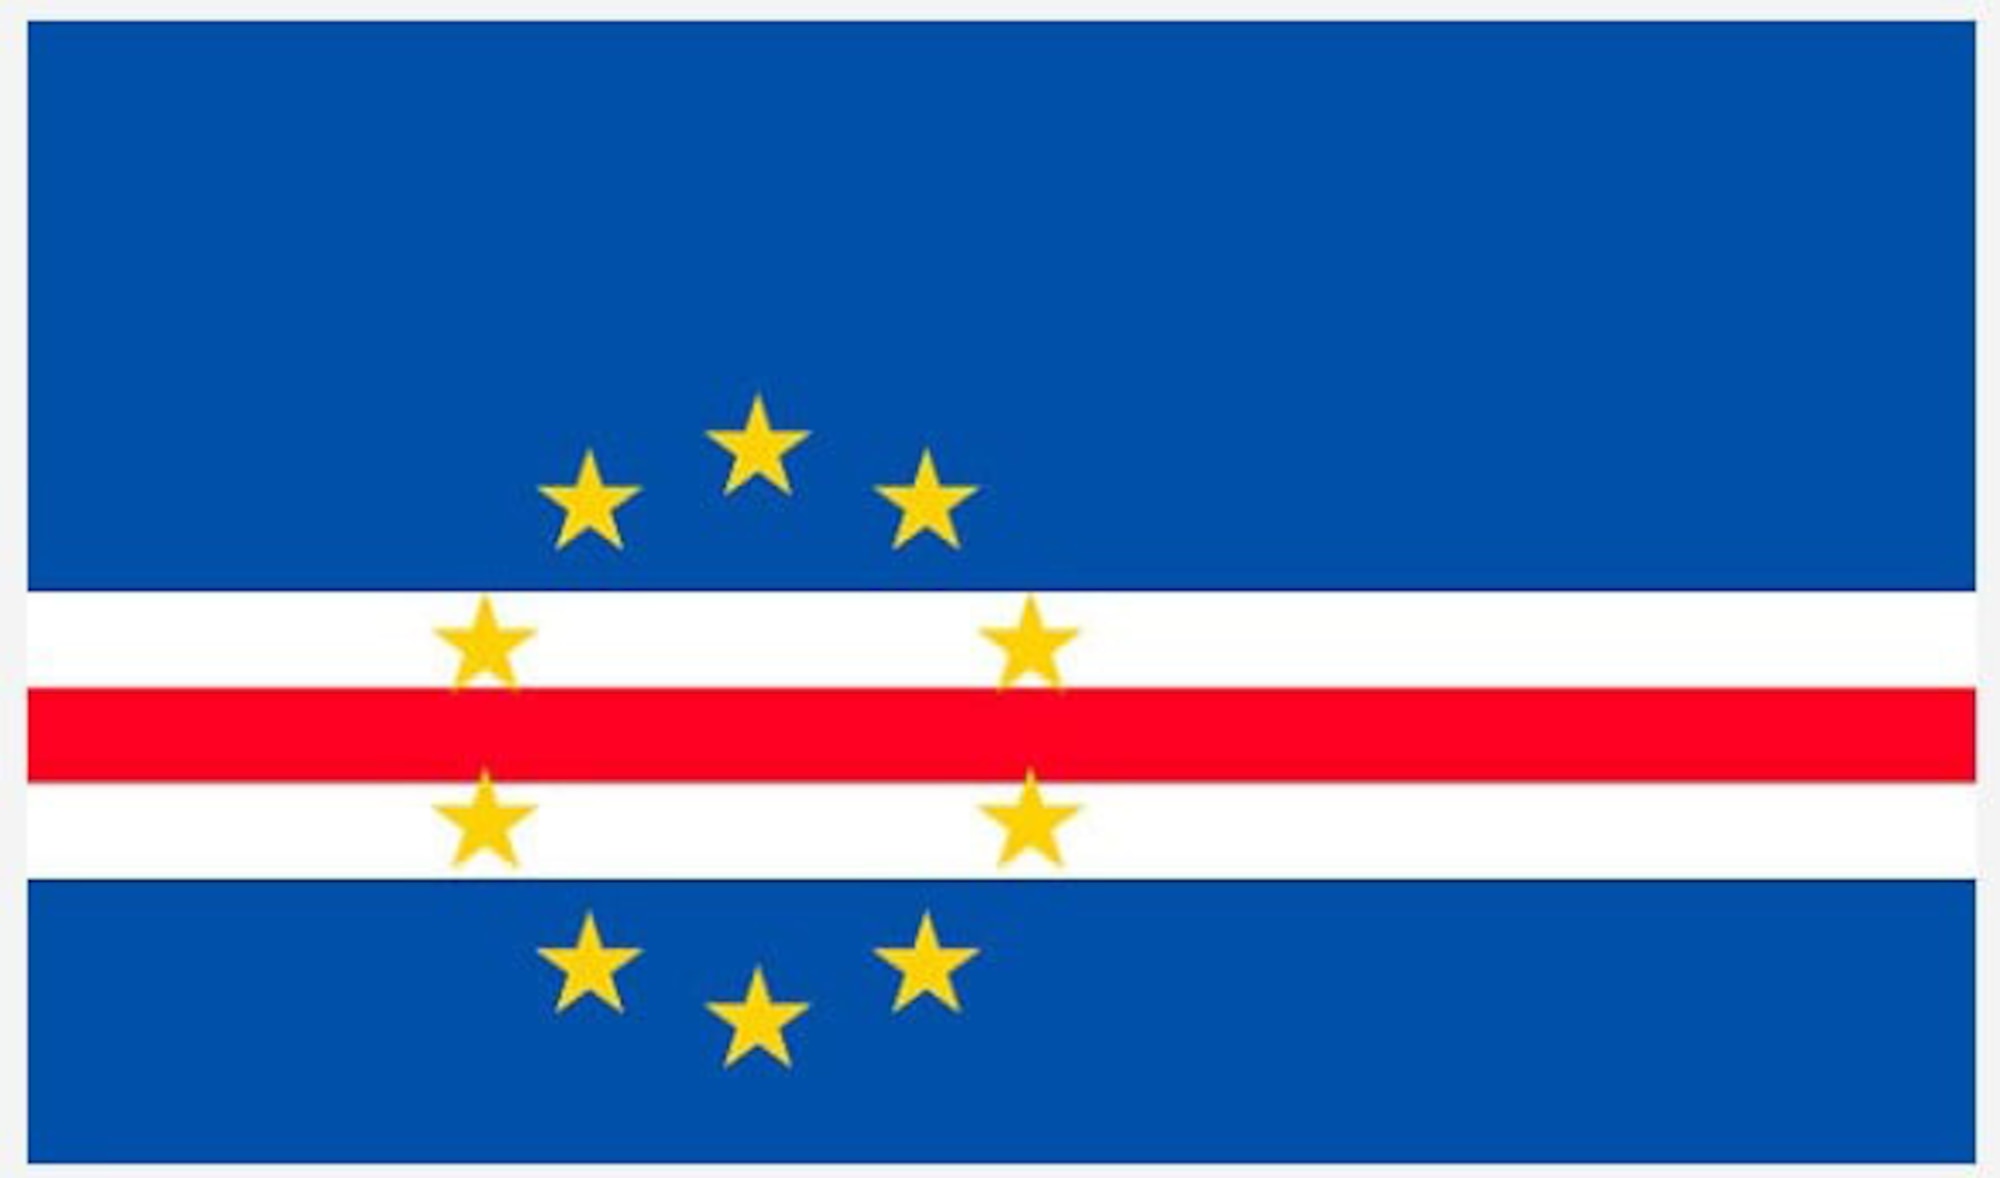 The national flag of Cabo Verde. The New Hampshire National Guard announced Oct. 18 it has been selected as the new state partner for the Republic of Cabo Verde, an archipelago in the Atlantic Ocean off the northwestern coast of Africa.